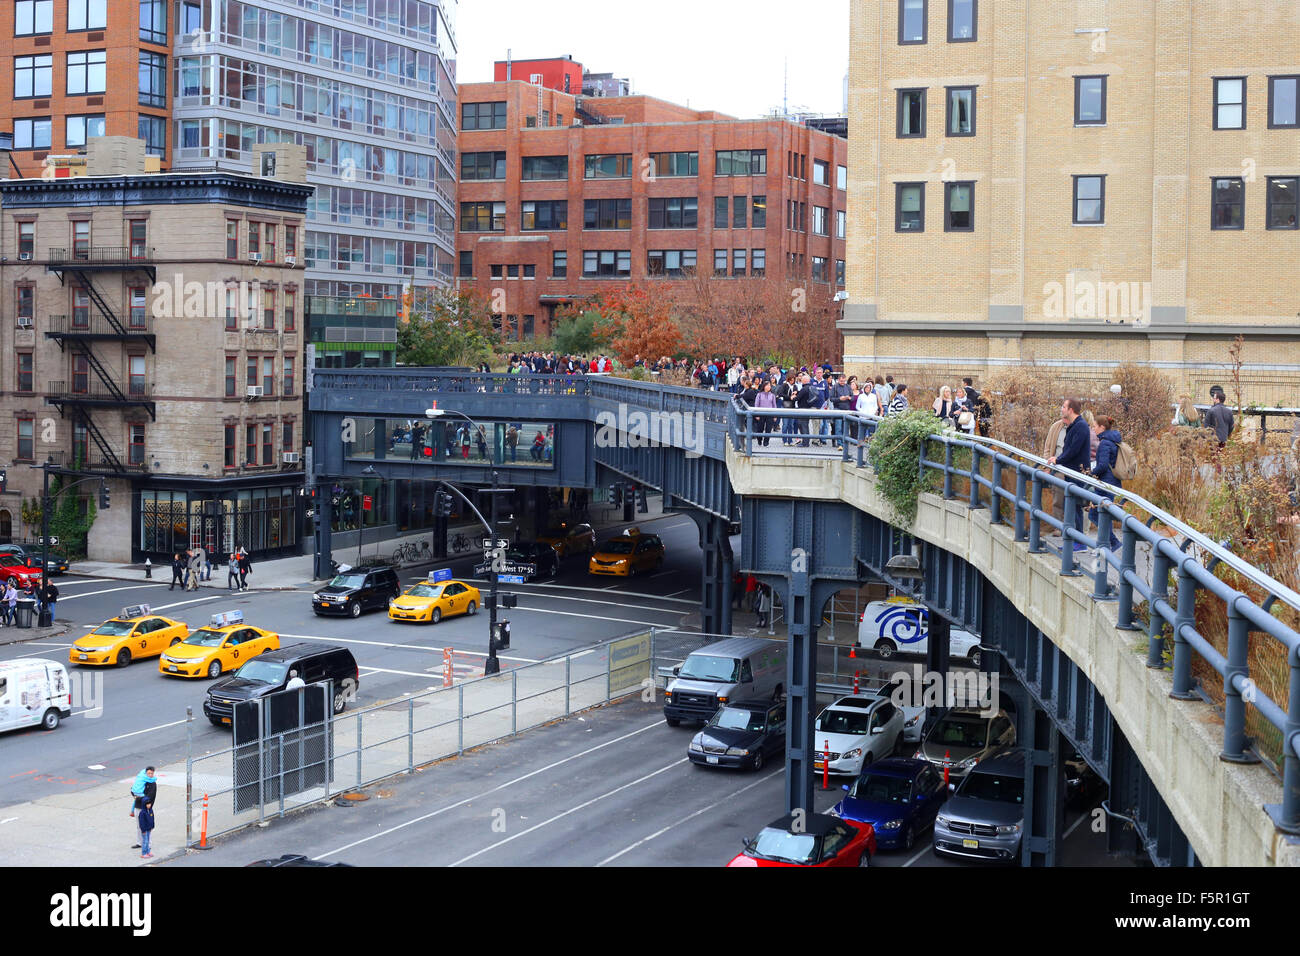 Section of the High Line elevated park in the Chelsea neighborhood of Manhattan, New York, NY. The park has led to rapid changes and gentrification Stock Photo